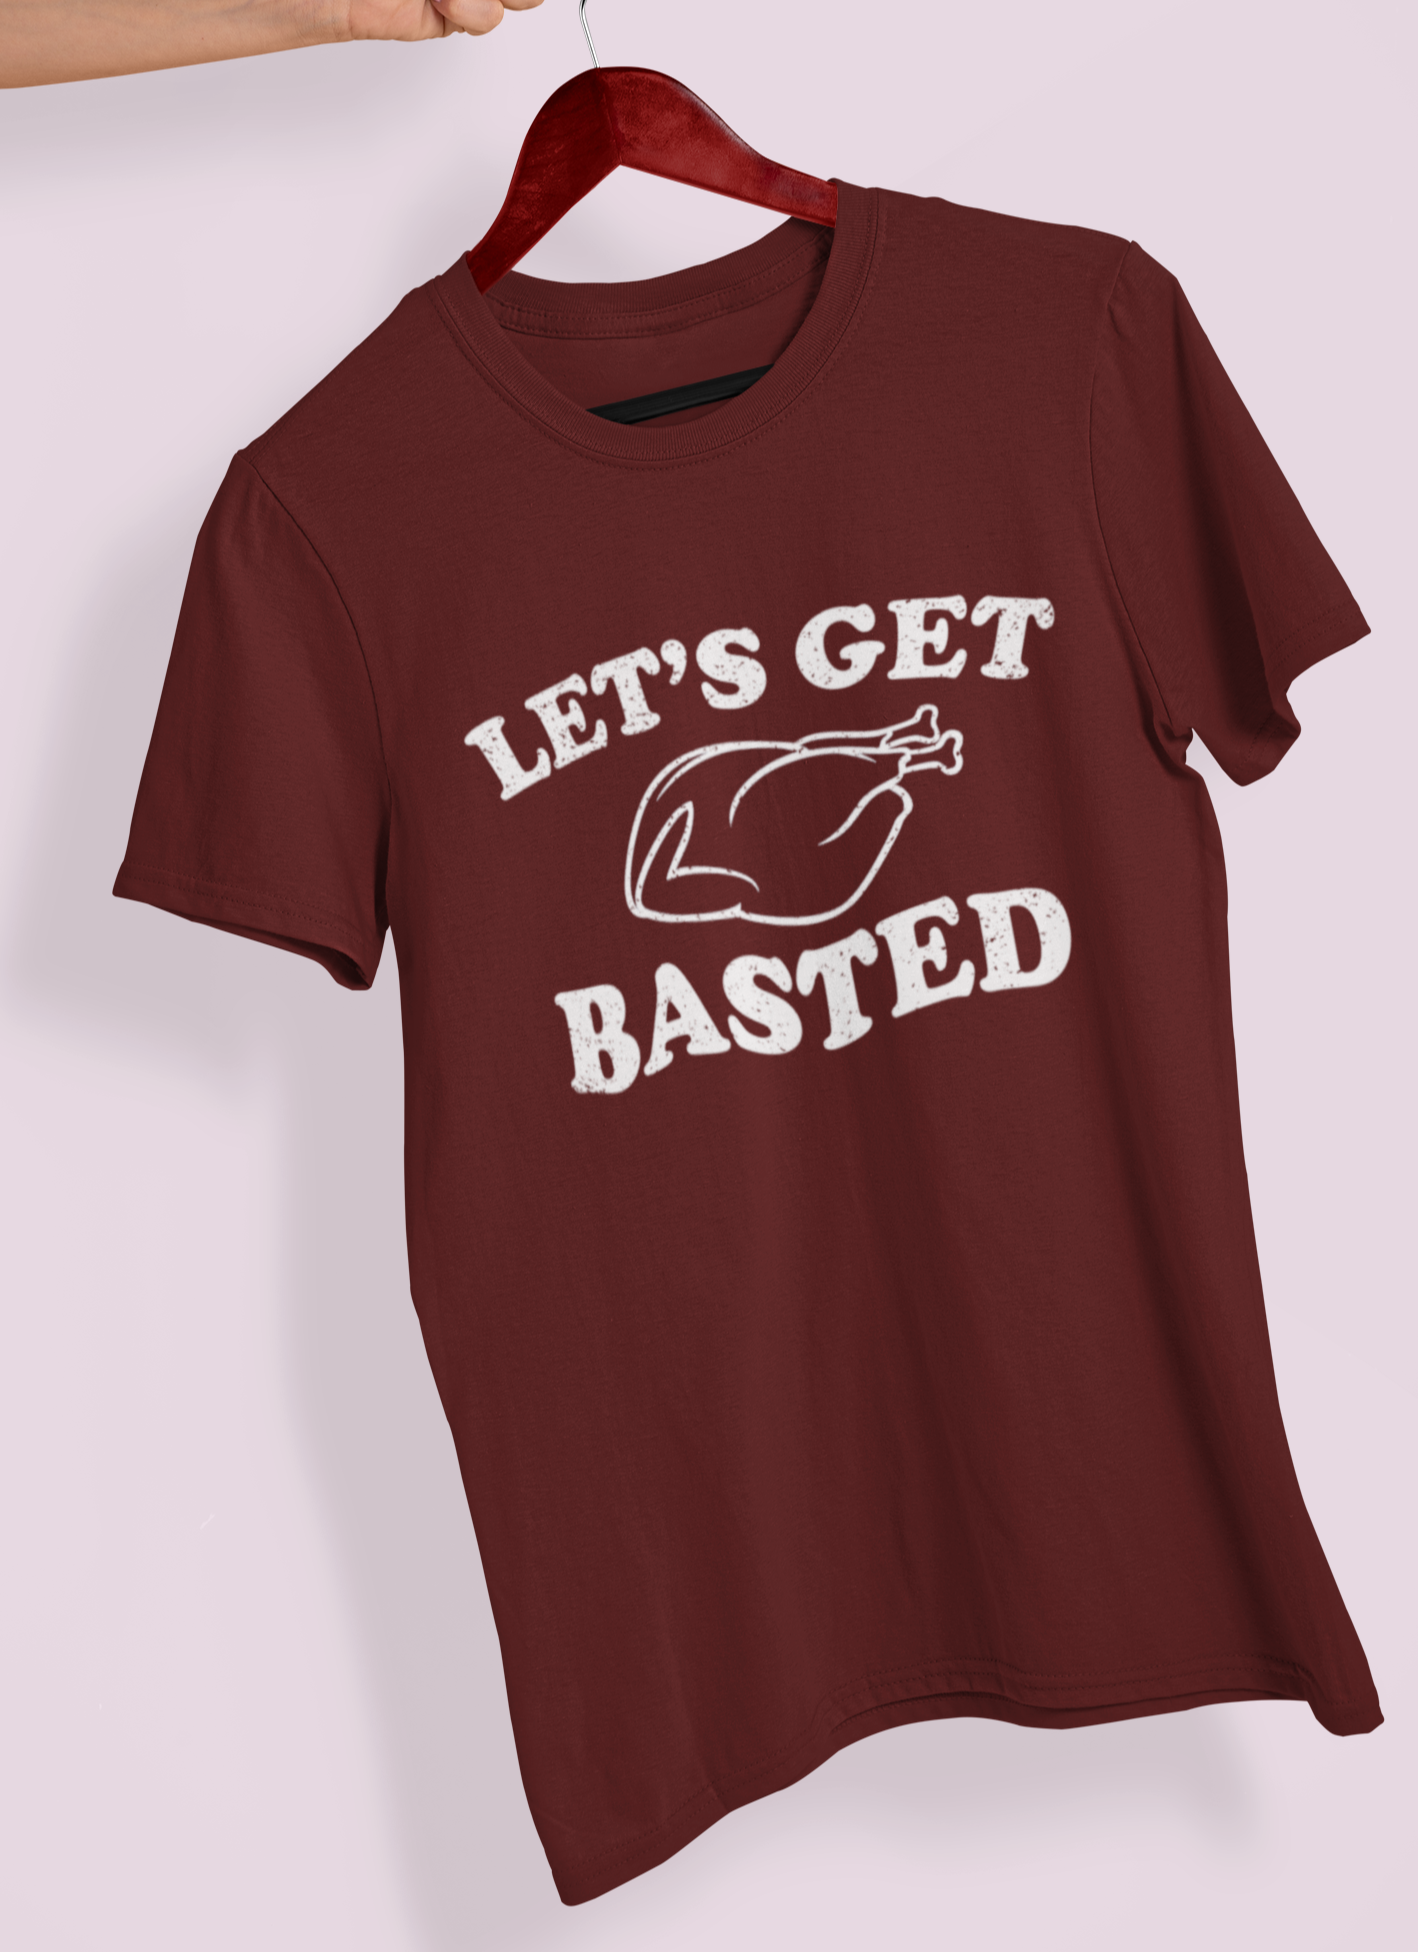 Maroon shirt with a turkey saying let's get basted - HighCiti